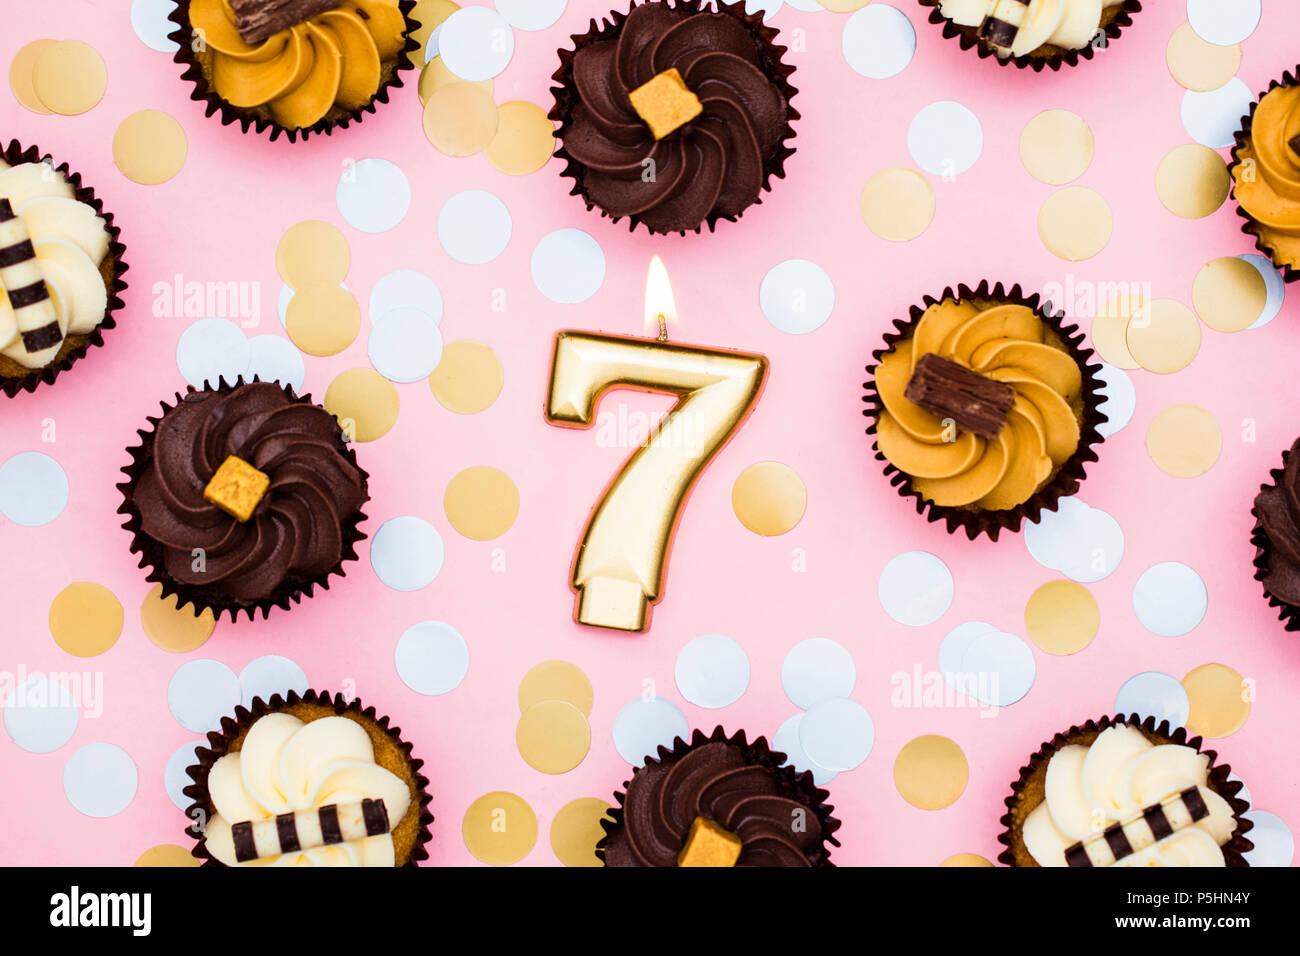 Number 7 gold candle with cupcakes against a pastel pink background Stock Photo